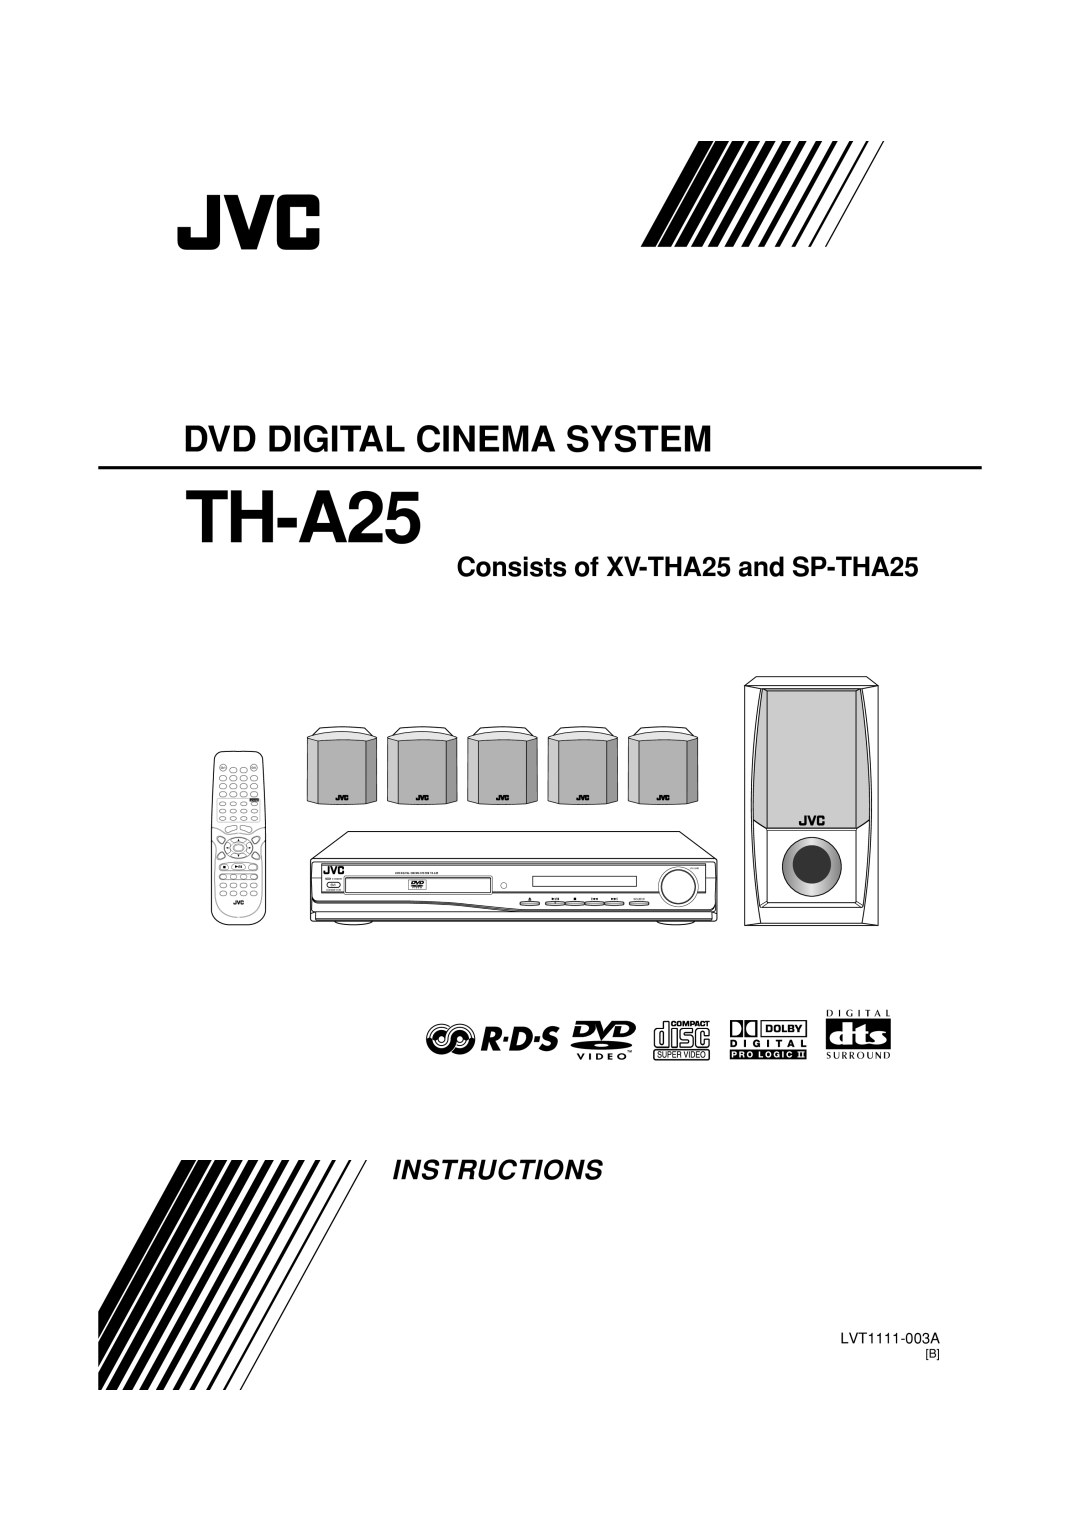 JVC TH-A25 manual Consists of XV-THA25and SP-THA25, Dvd Digital Cinema System, Instructions, LVT1111-003A, Source, Sound 